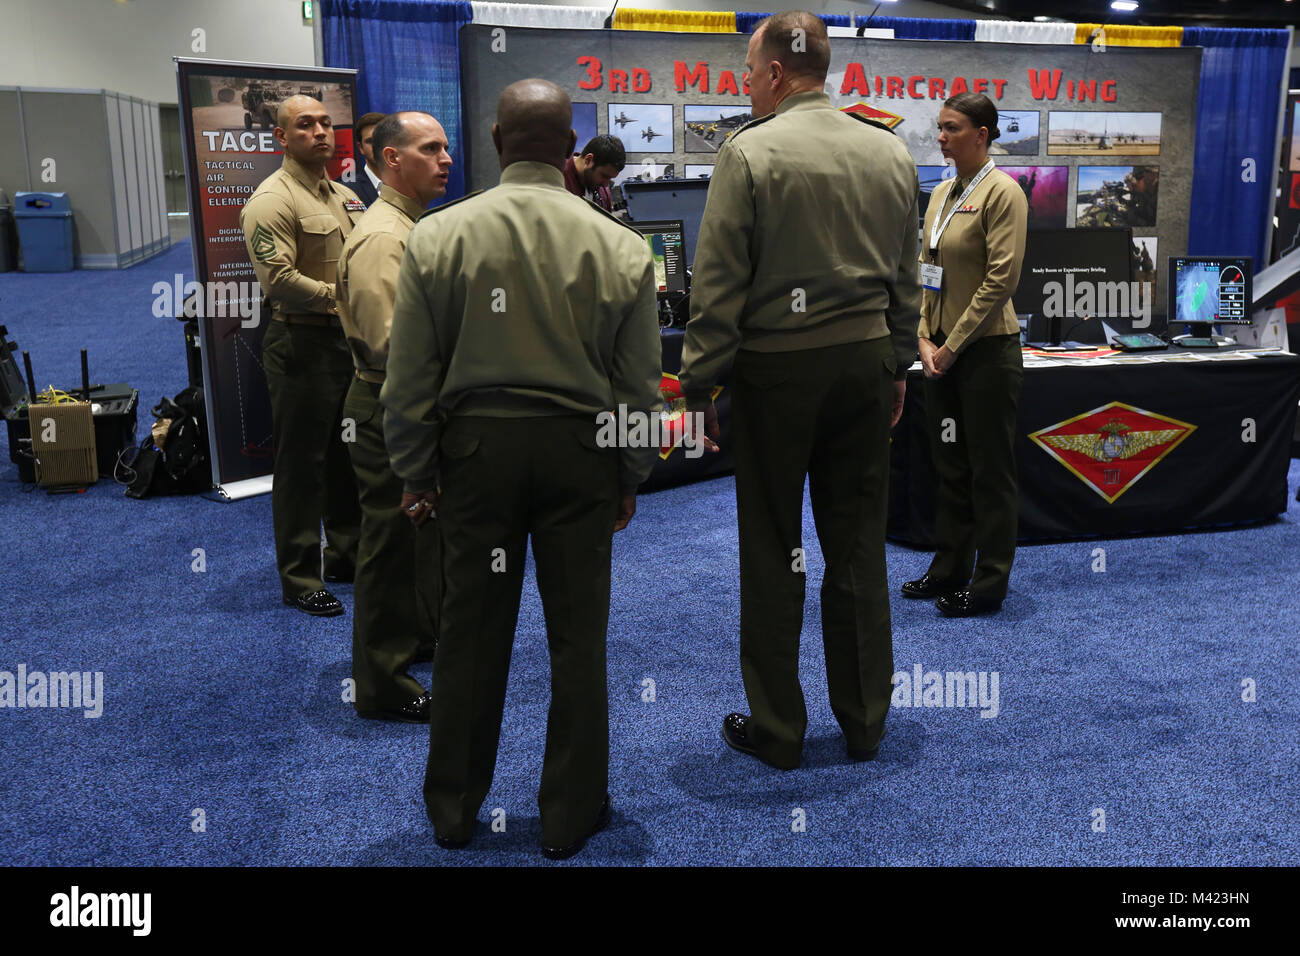 Maj. Gen. Mark R. Wise, 3rd Marine Aircraft Wing (MAW) commanding general, visits the 3rd MAW display at WEST 2018 in San Diego, Feb. 8. WEST 2018 allows innovators, industry leaders and the military the opportunity to network, learn and work together with the goal of meeting and overcoming challenges facing today's Sea Services. (U.S. Marine Corps photo by Sgt. David Bickel/Released) Stock Photo